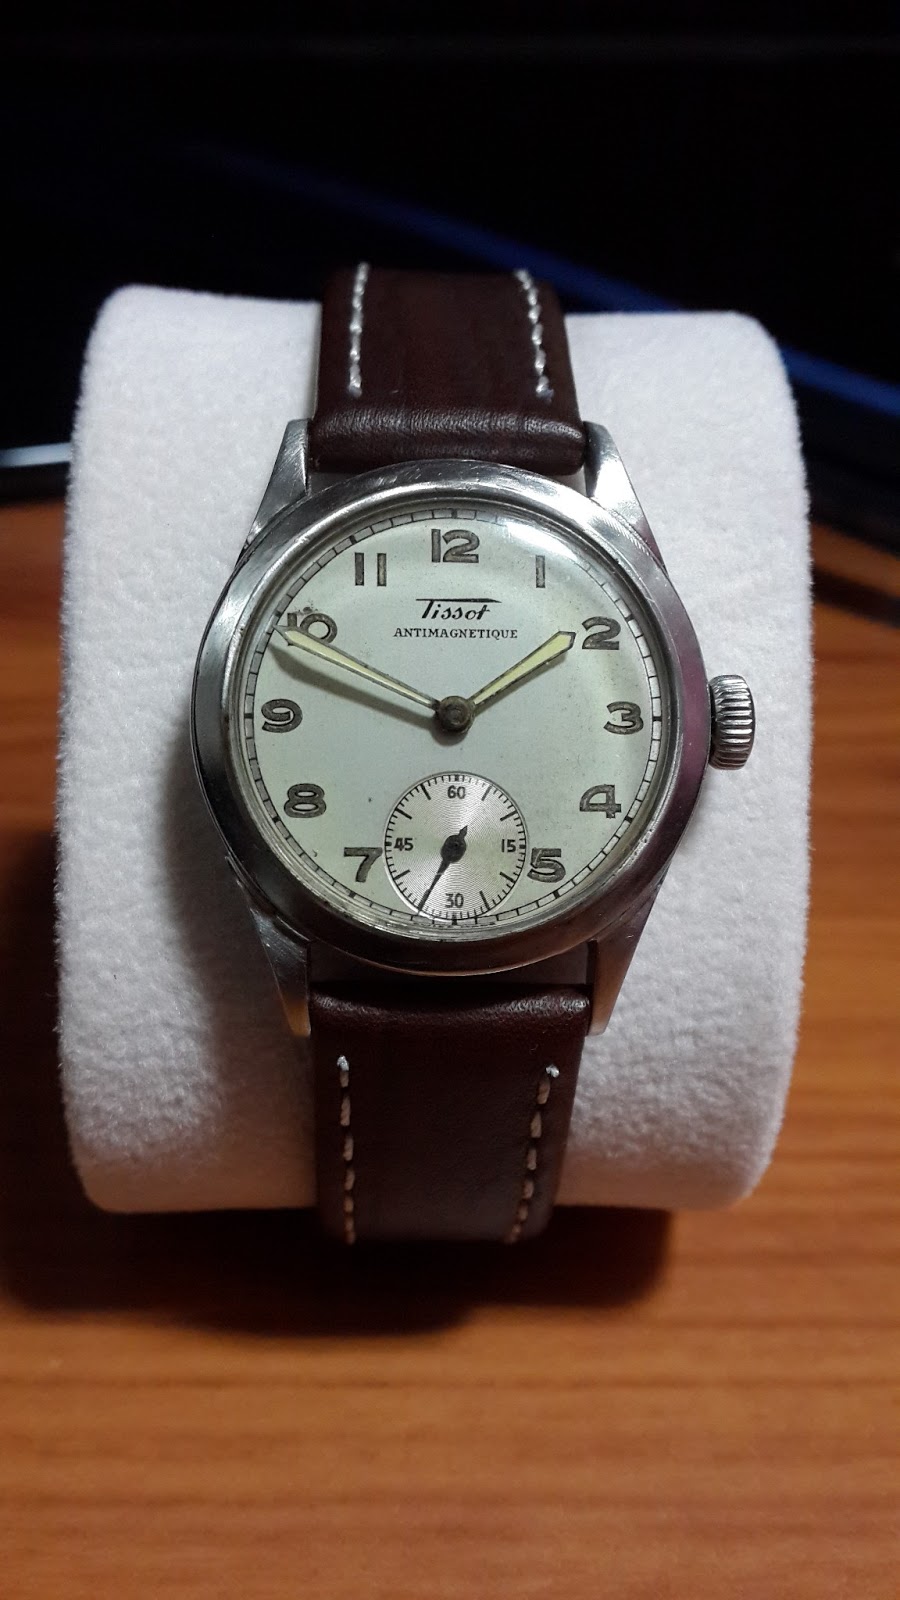 Comes with Italian calf leather strap.